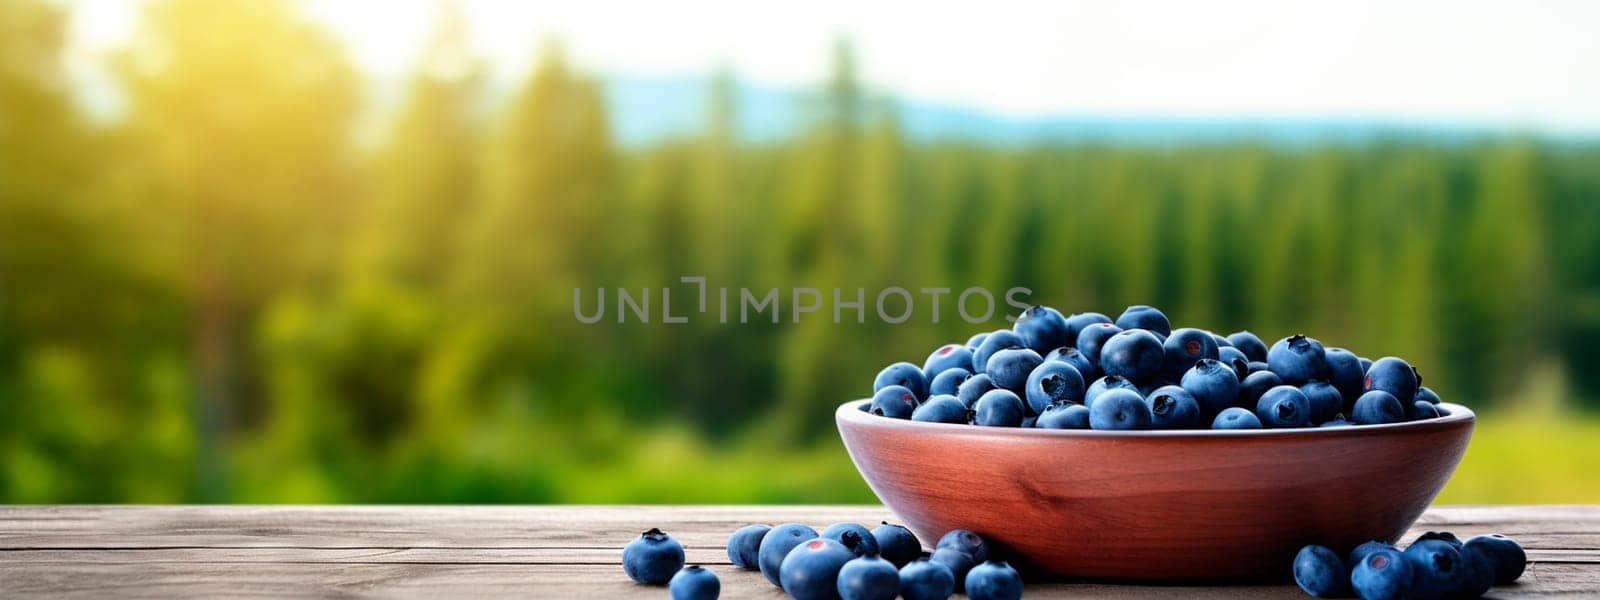 Blueberries in a bowl in the garden. Selective focus. Food.